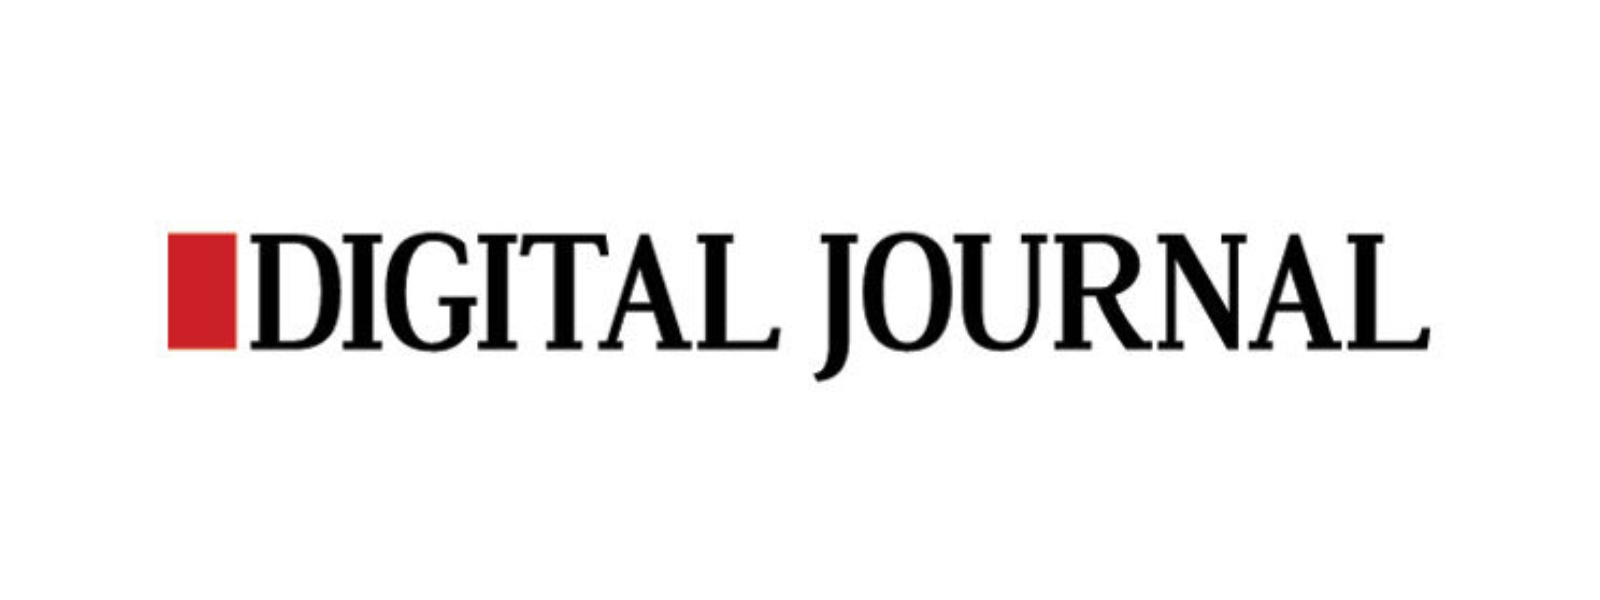 Available Mover In Digital Journal